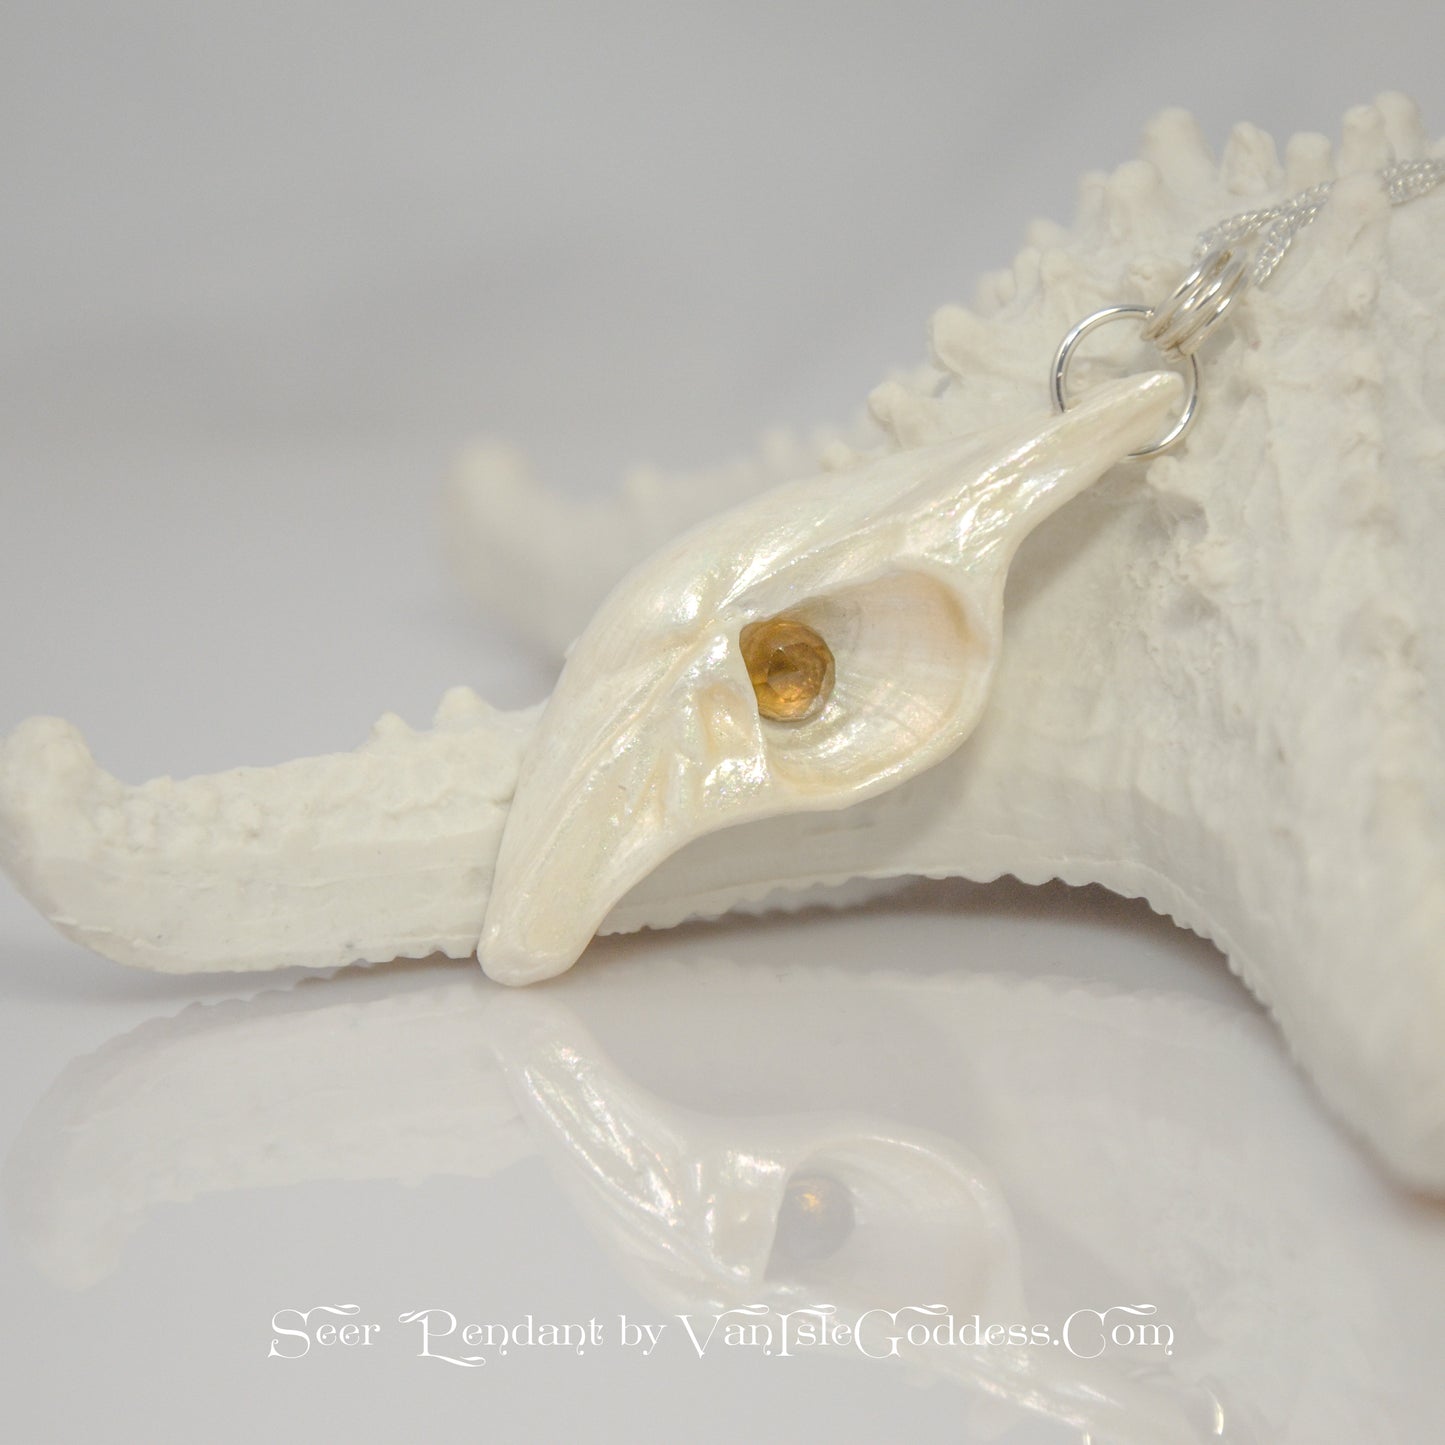 Seer is a natural seashell pendant with a beautiful 5mm rose cut Smokey Quartz compliments the pendant. The pendant is shown resting on a starfish.